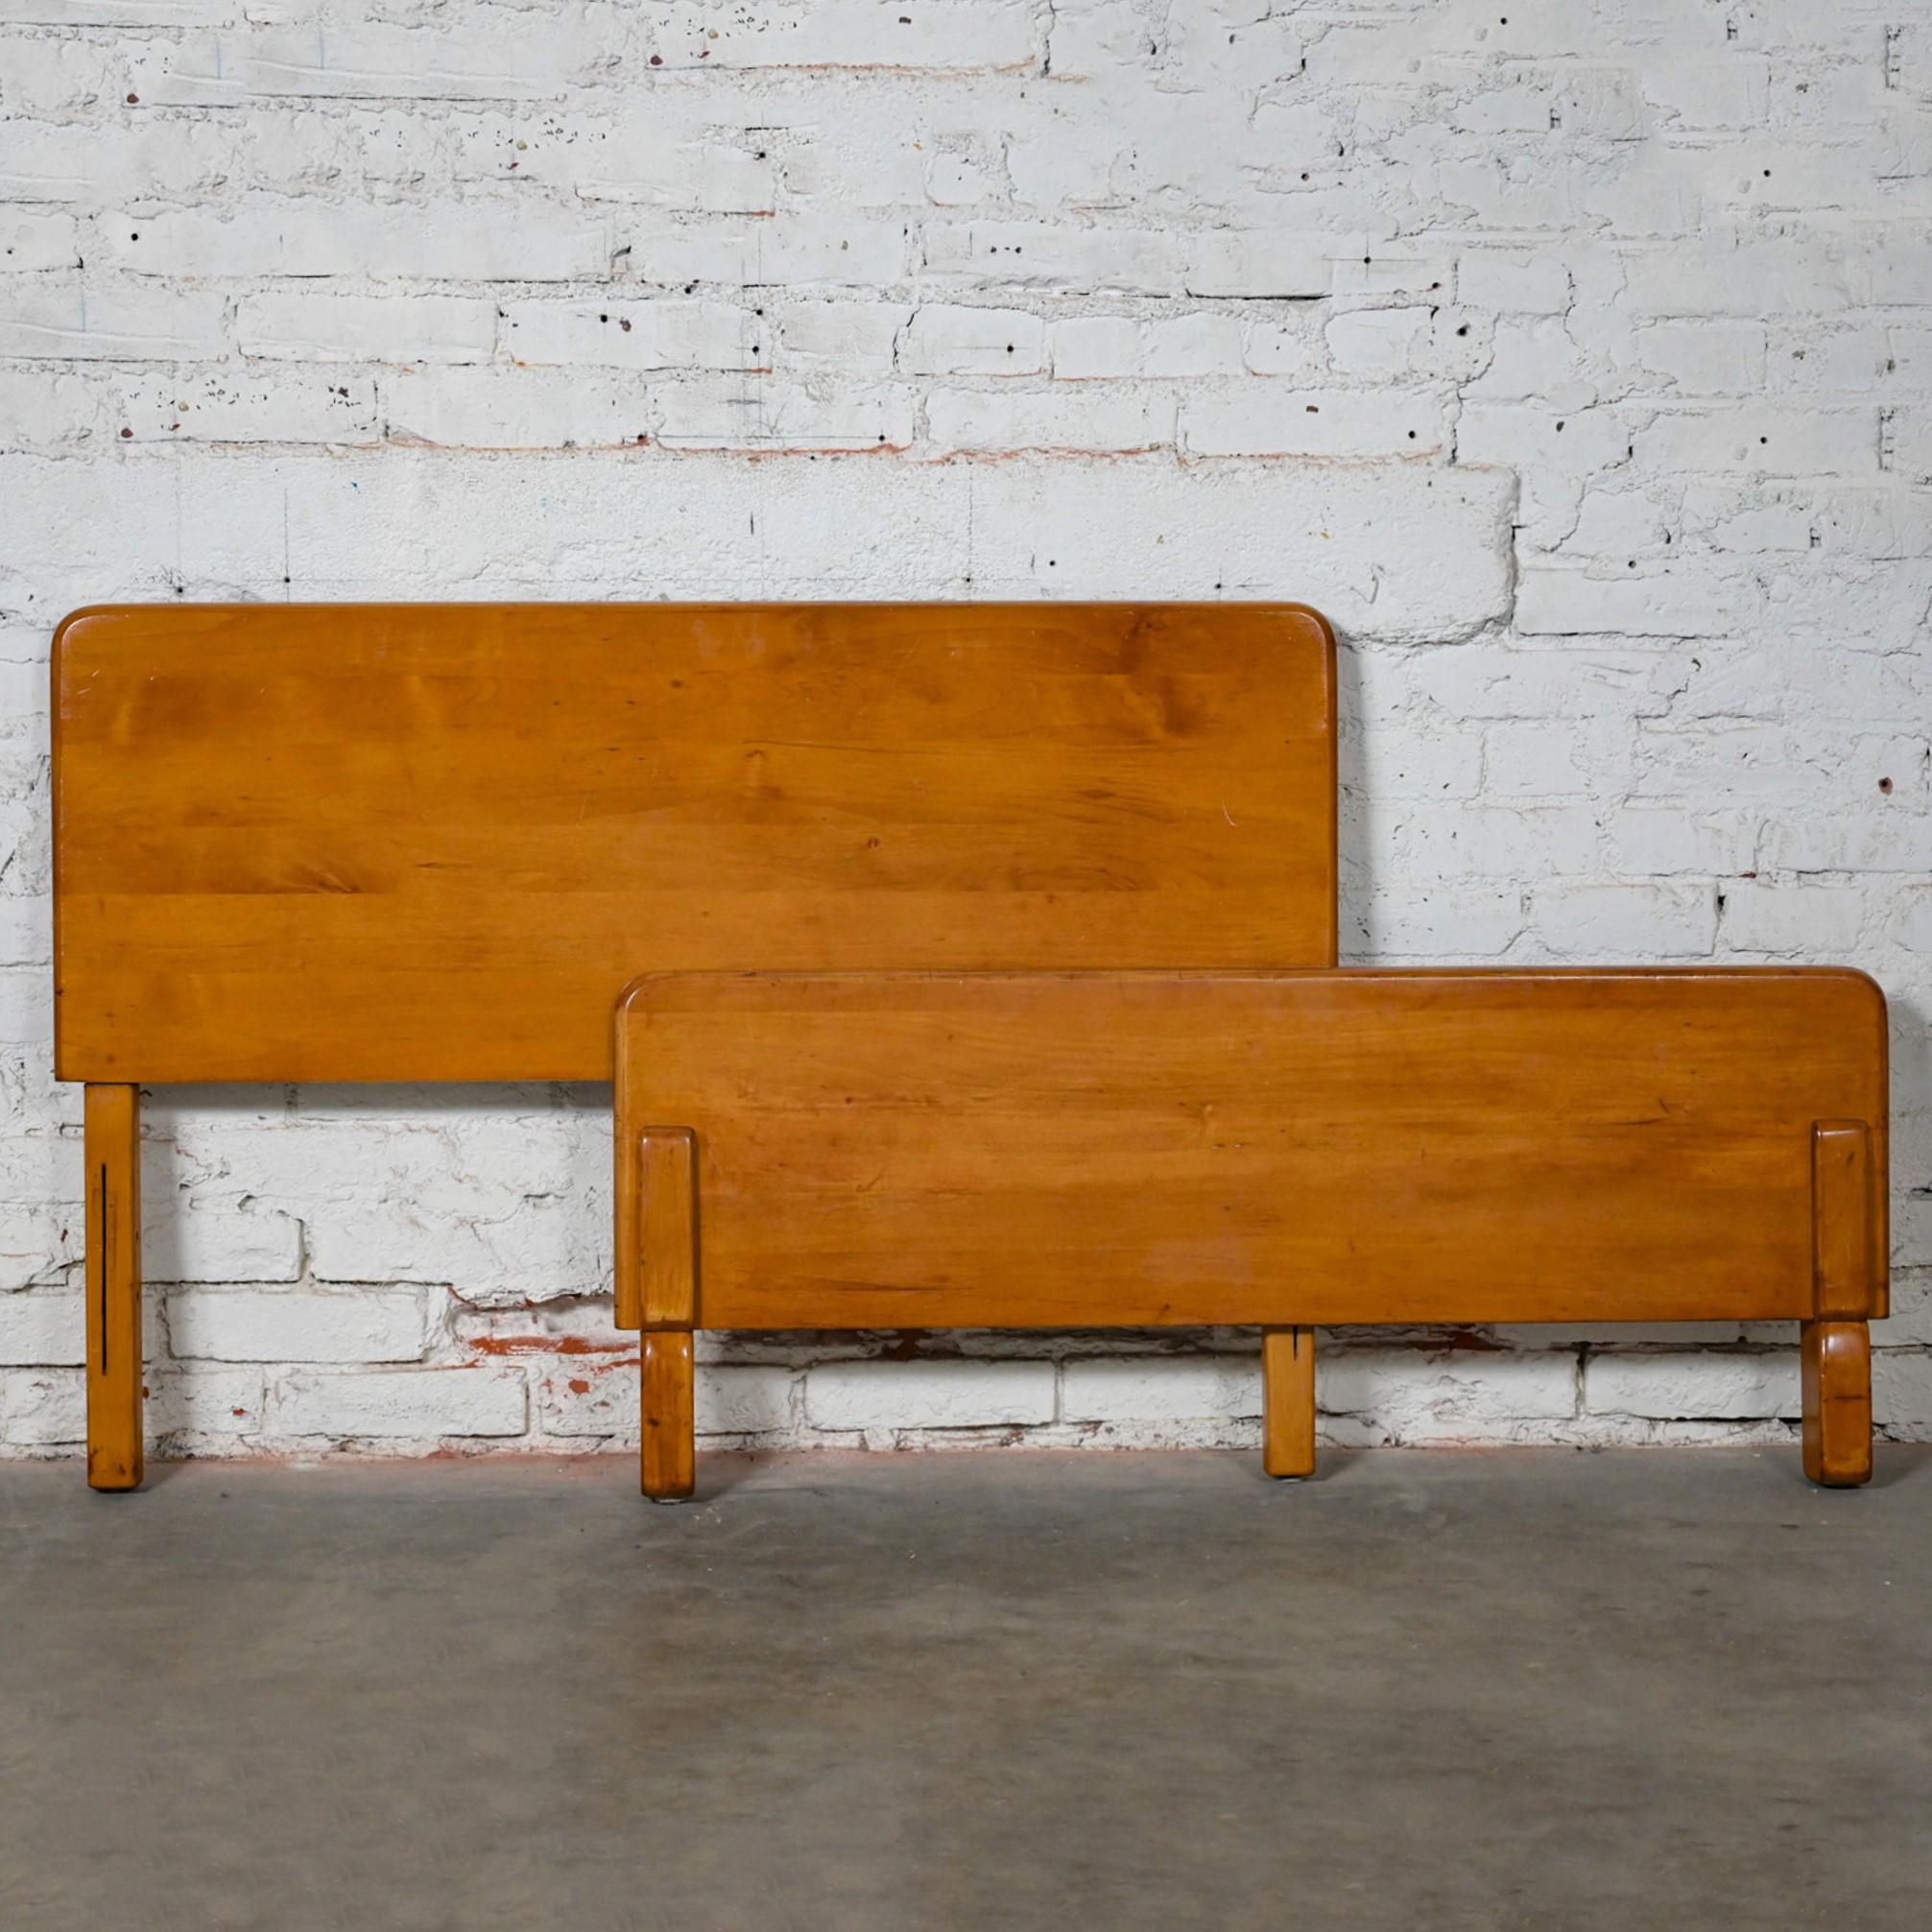 Early-Mid-20th Century Art Moderne Maple Twin Bed Headboard & Footboard  For Sale 9